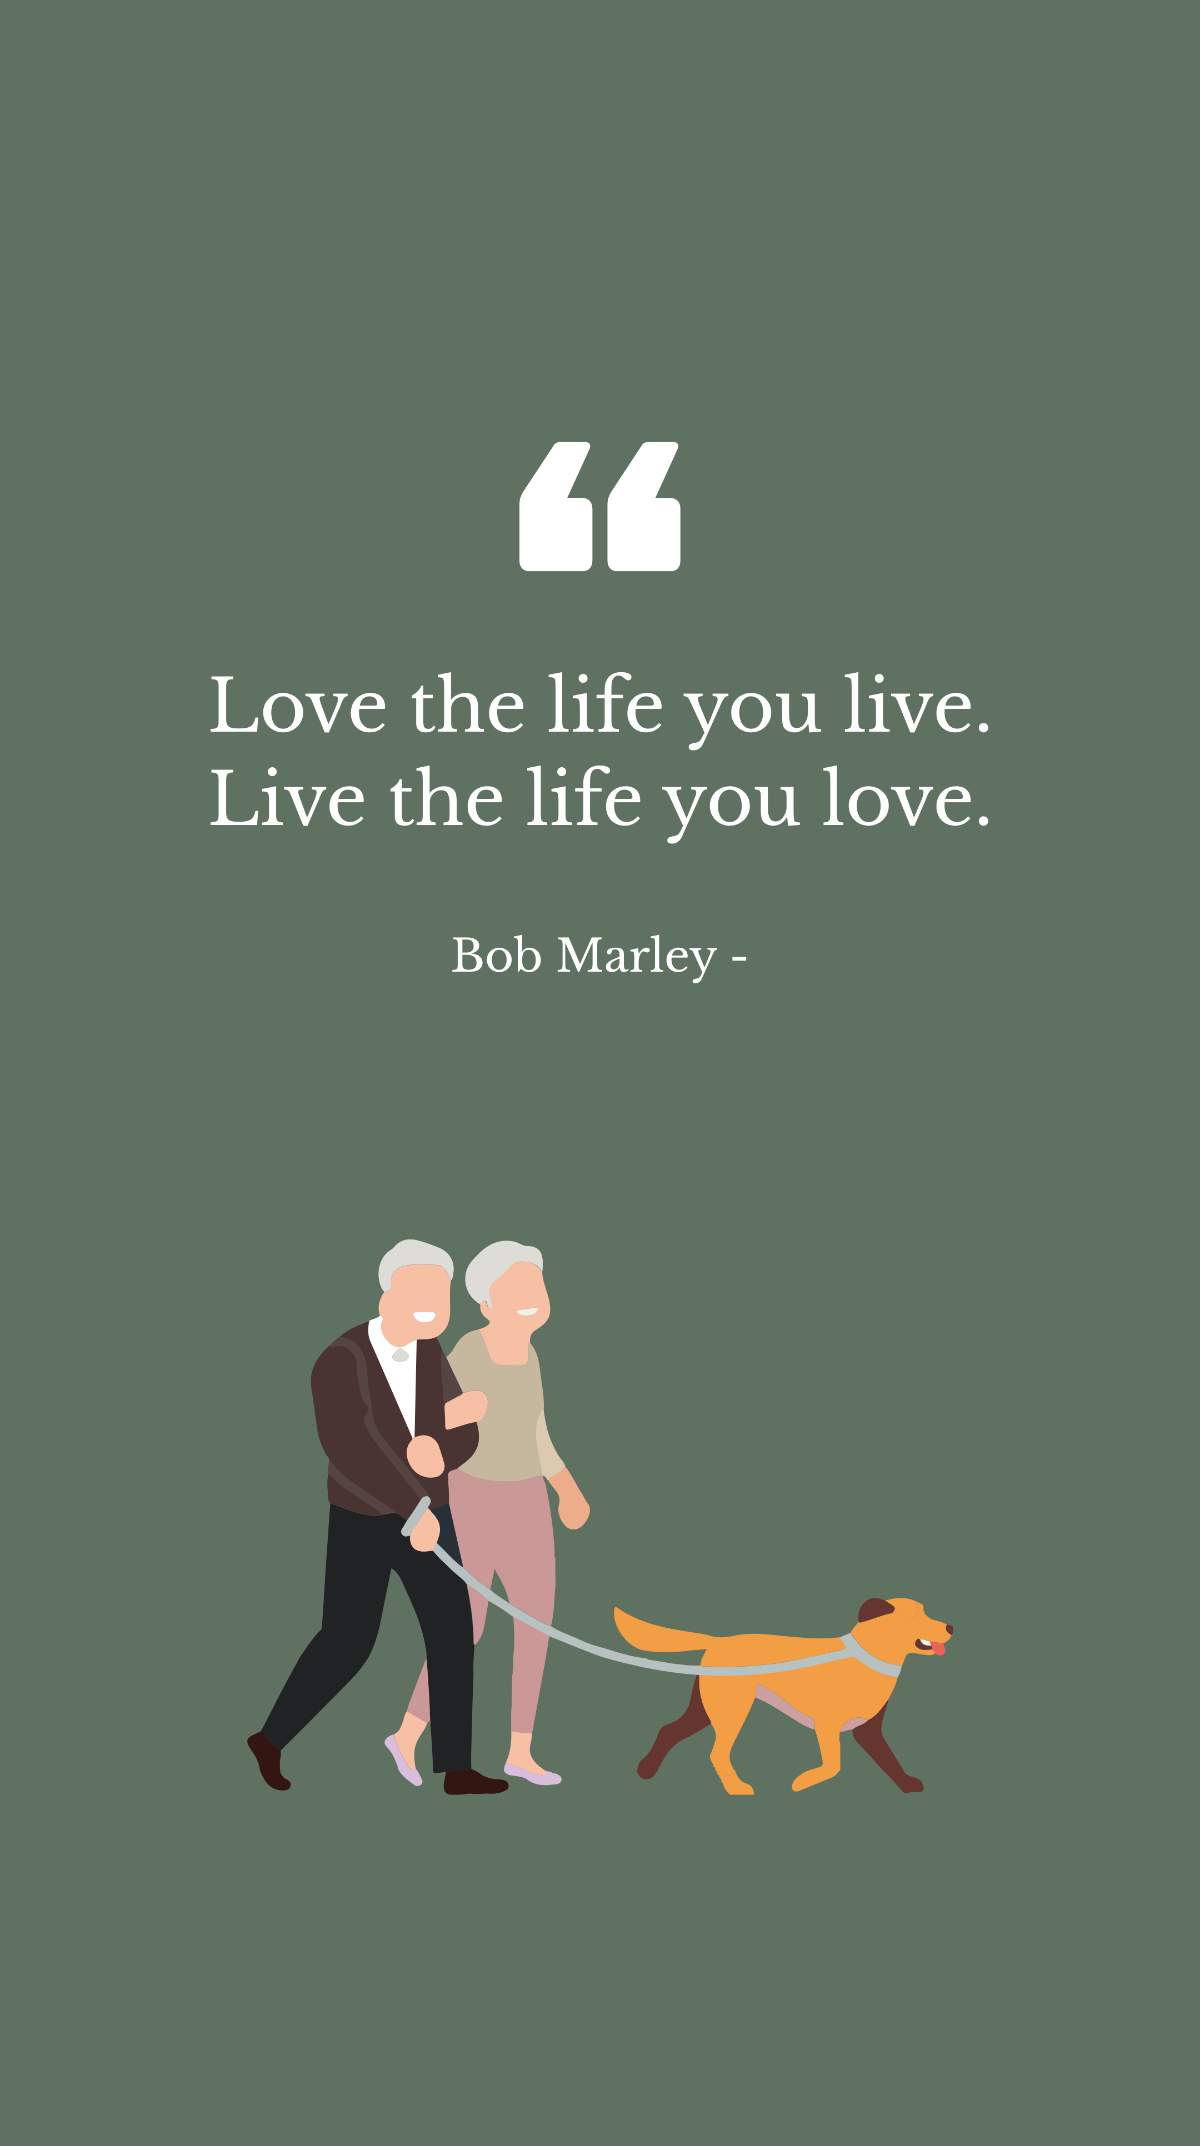 Free Bob Marley - Love the life you live. Live the life you love. Template